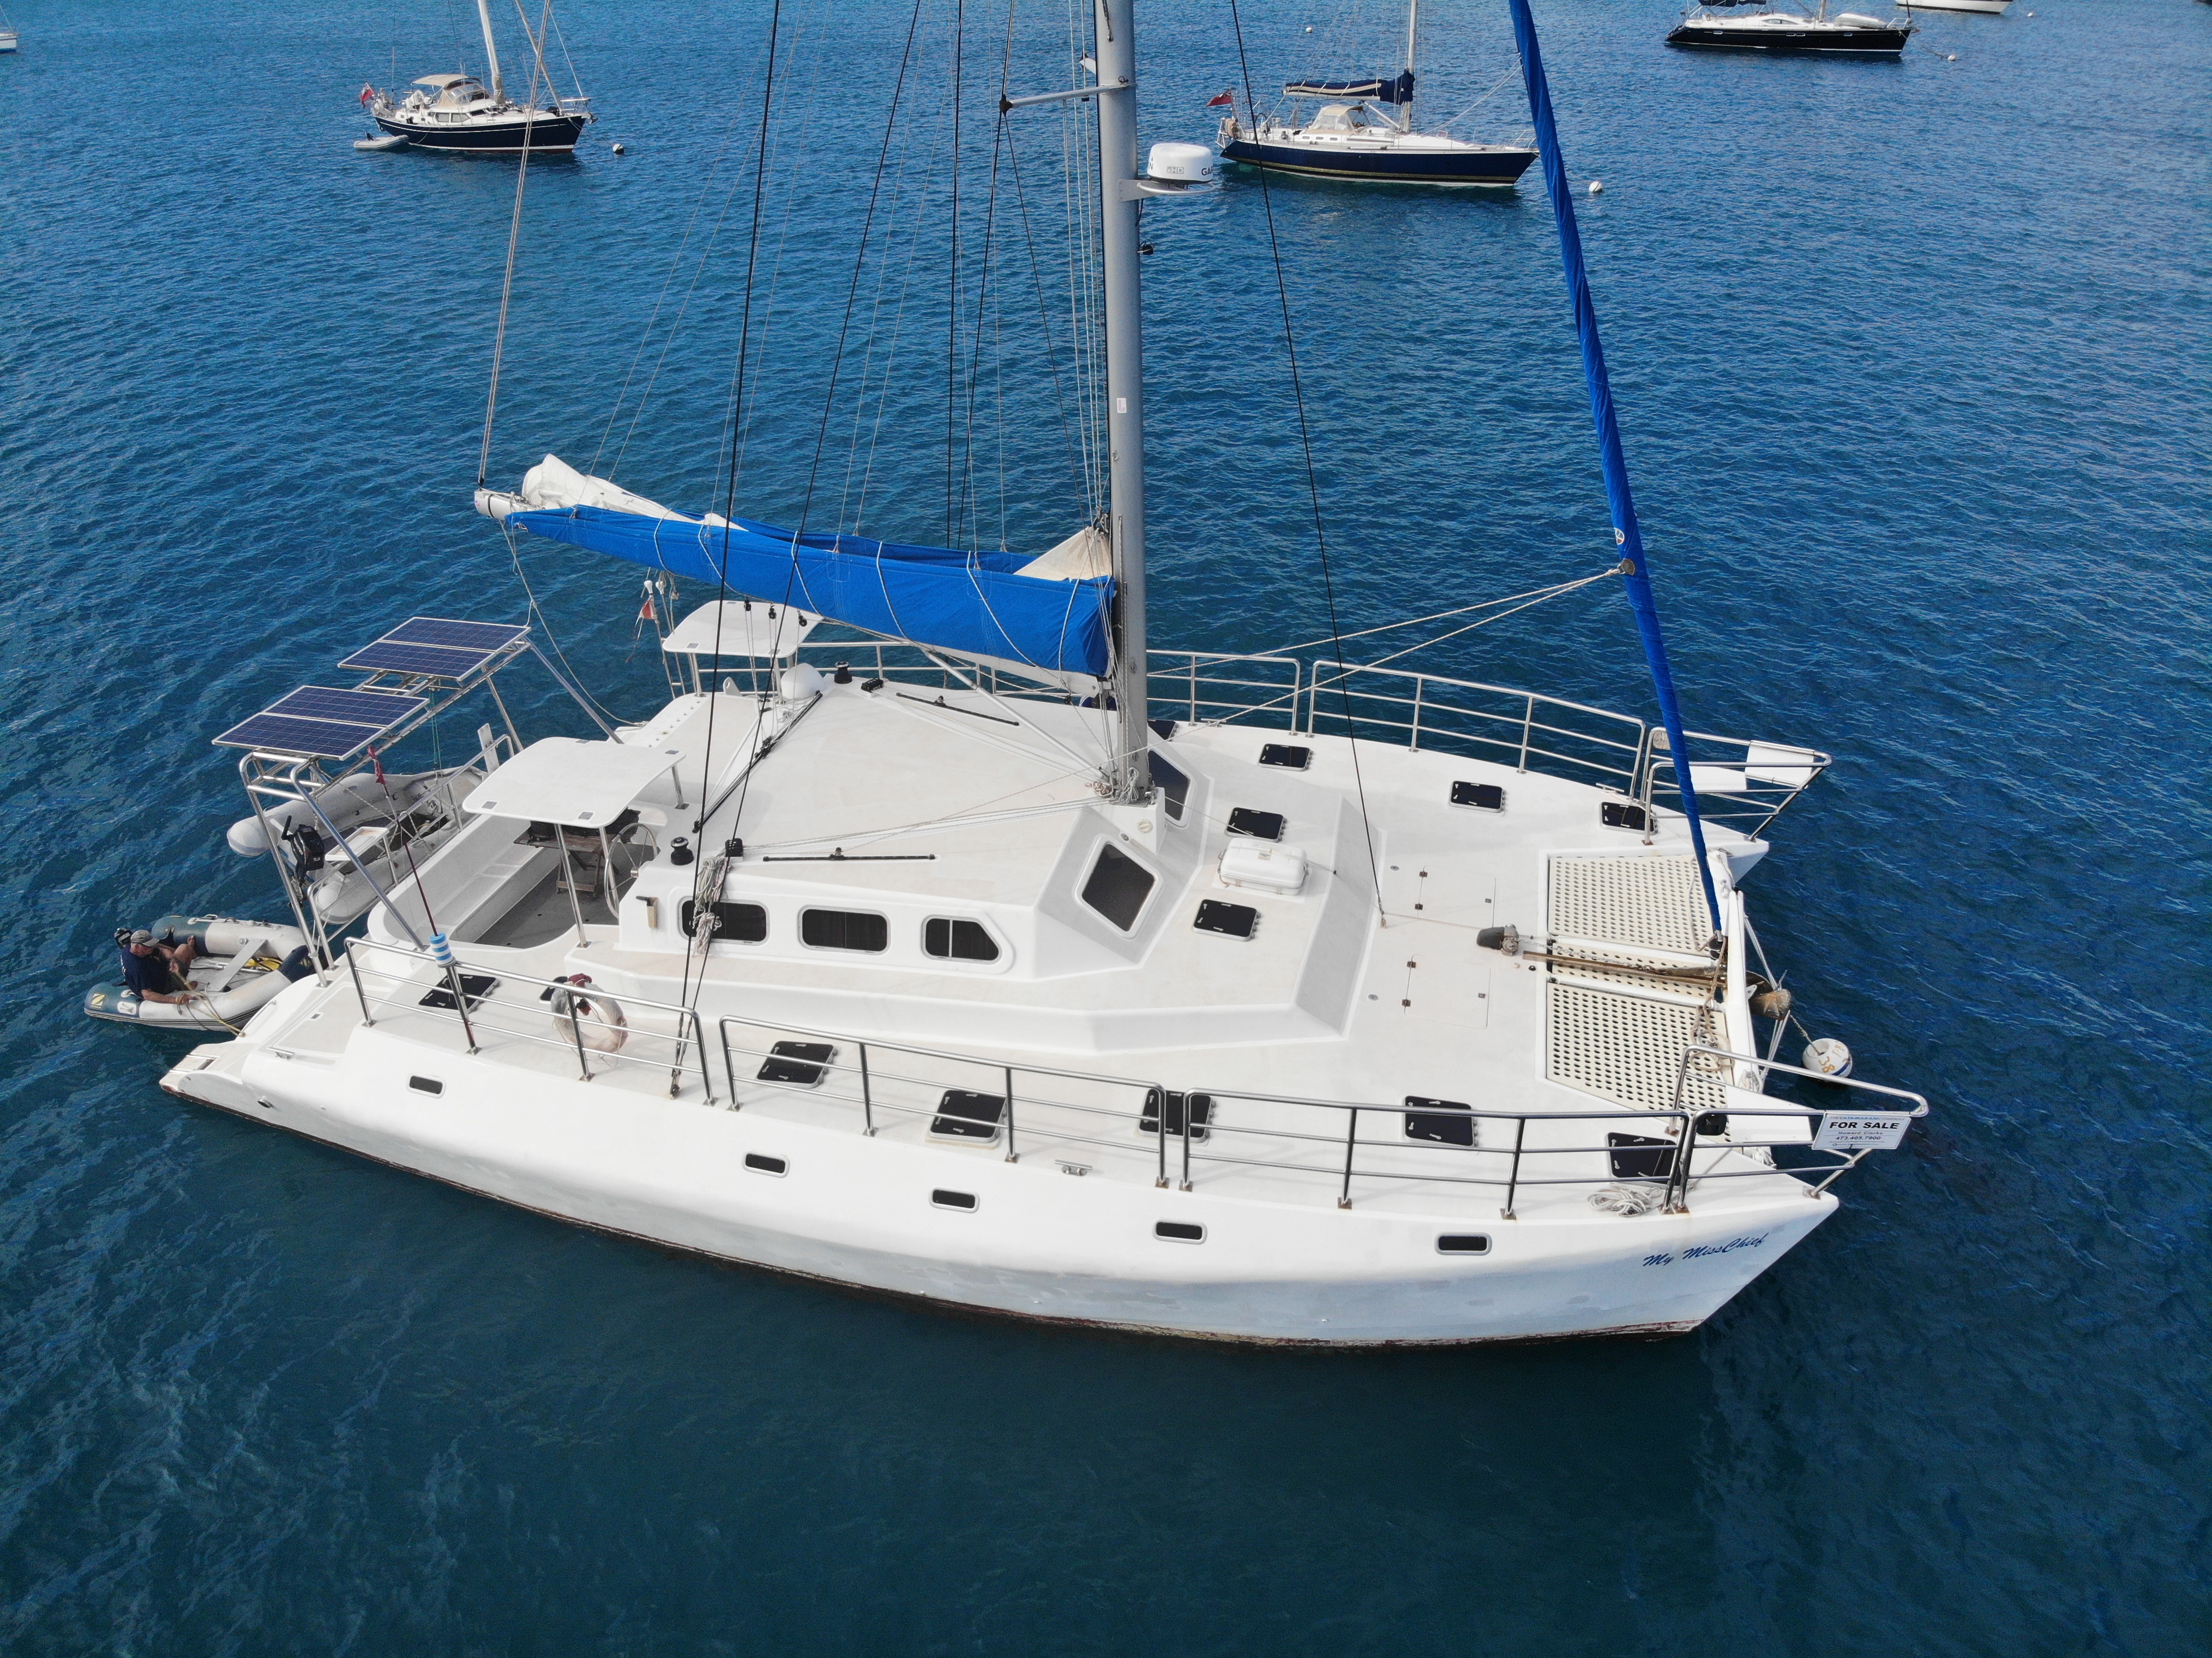 Latest Listings and Price Cuts on Catamarans.com 